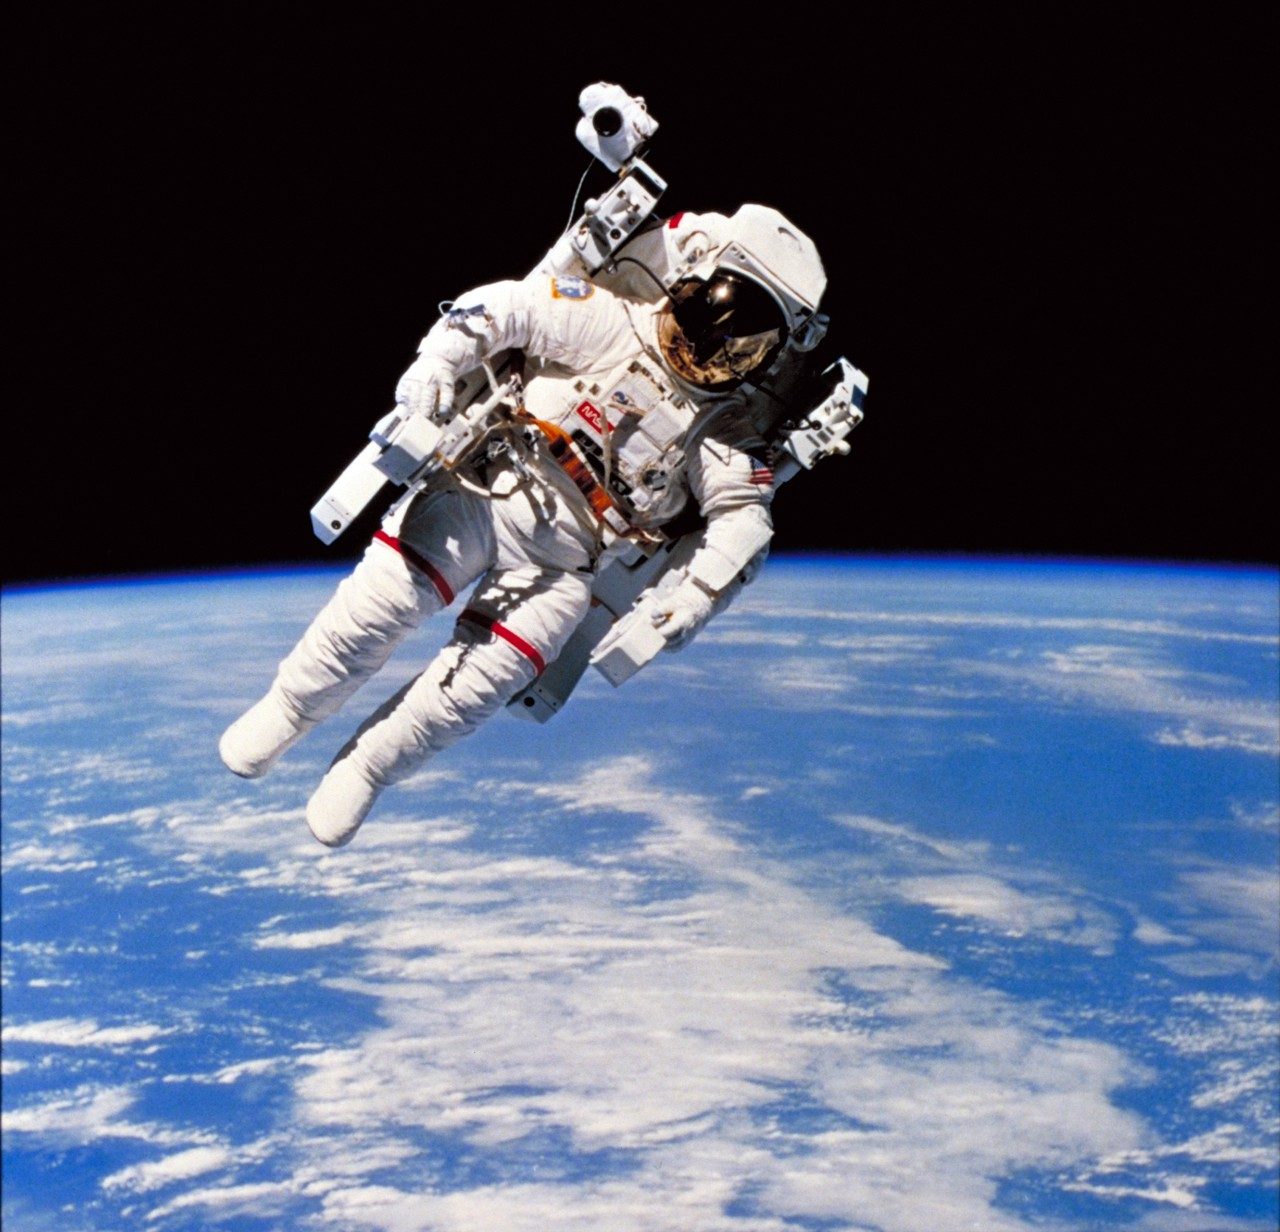 Why don't we see more ordinary people going into space? | MIT